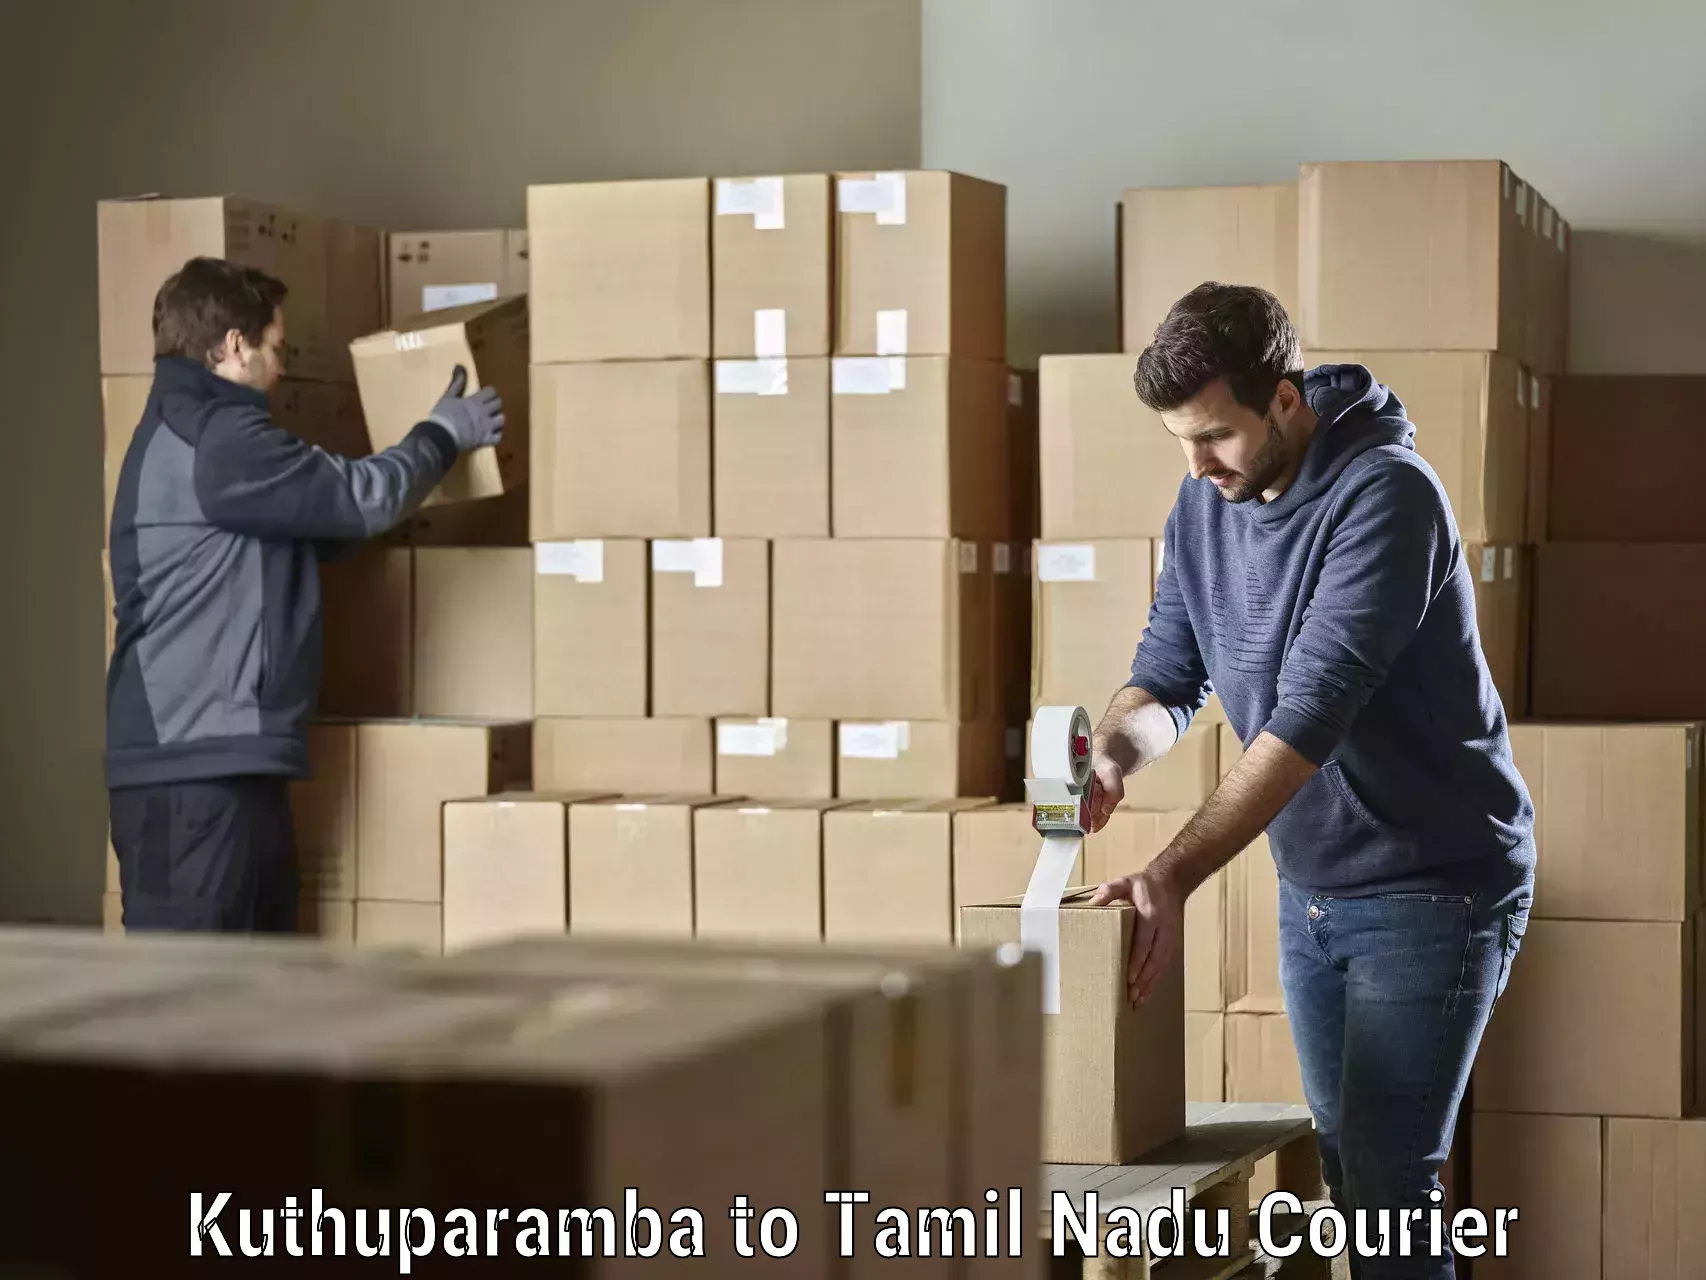 State-of-the-art courier technology Kuthuparamba to Peralam